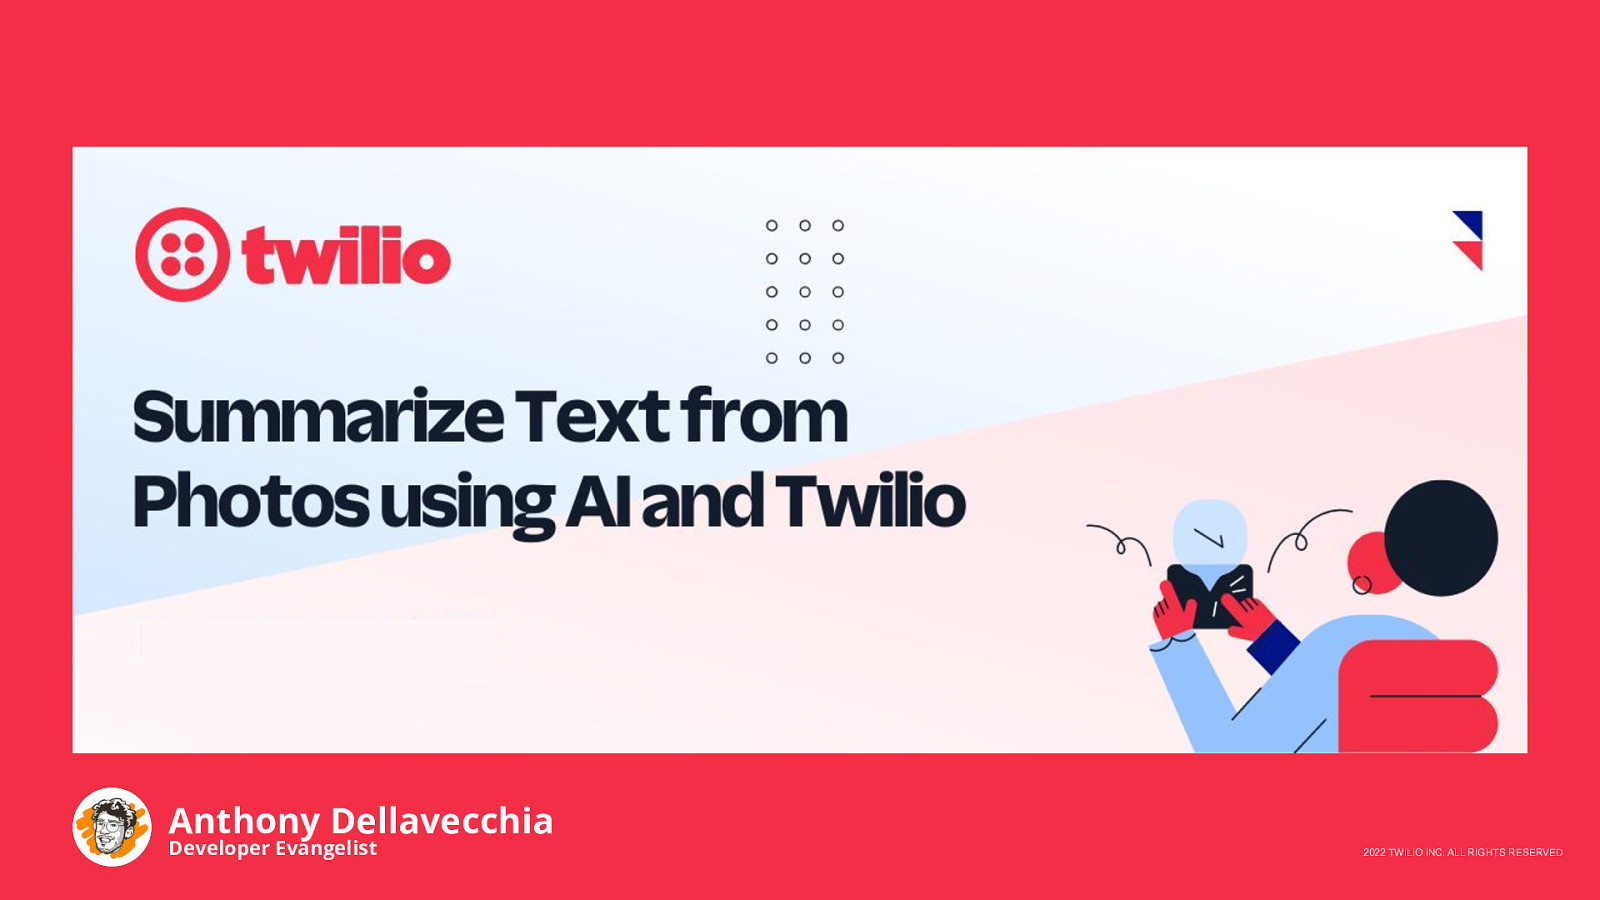 Summarize Text from Images using AI and Twilio